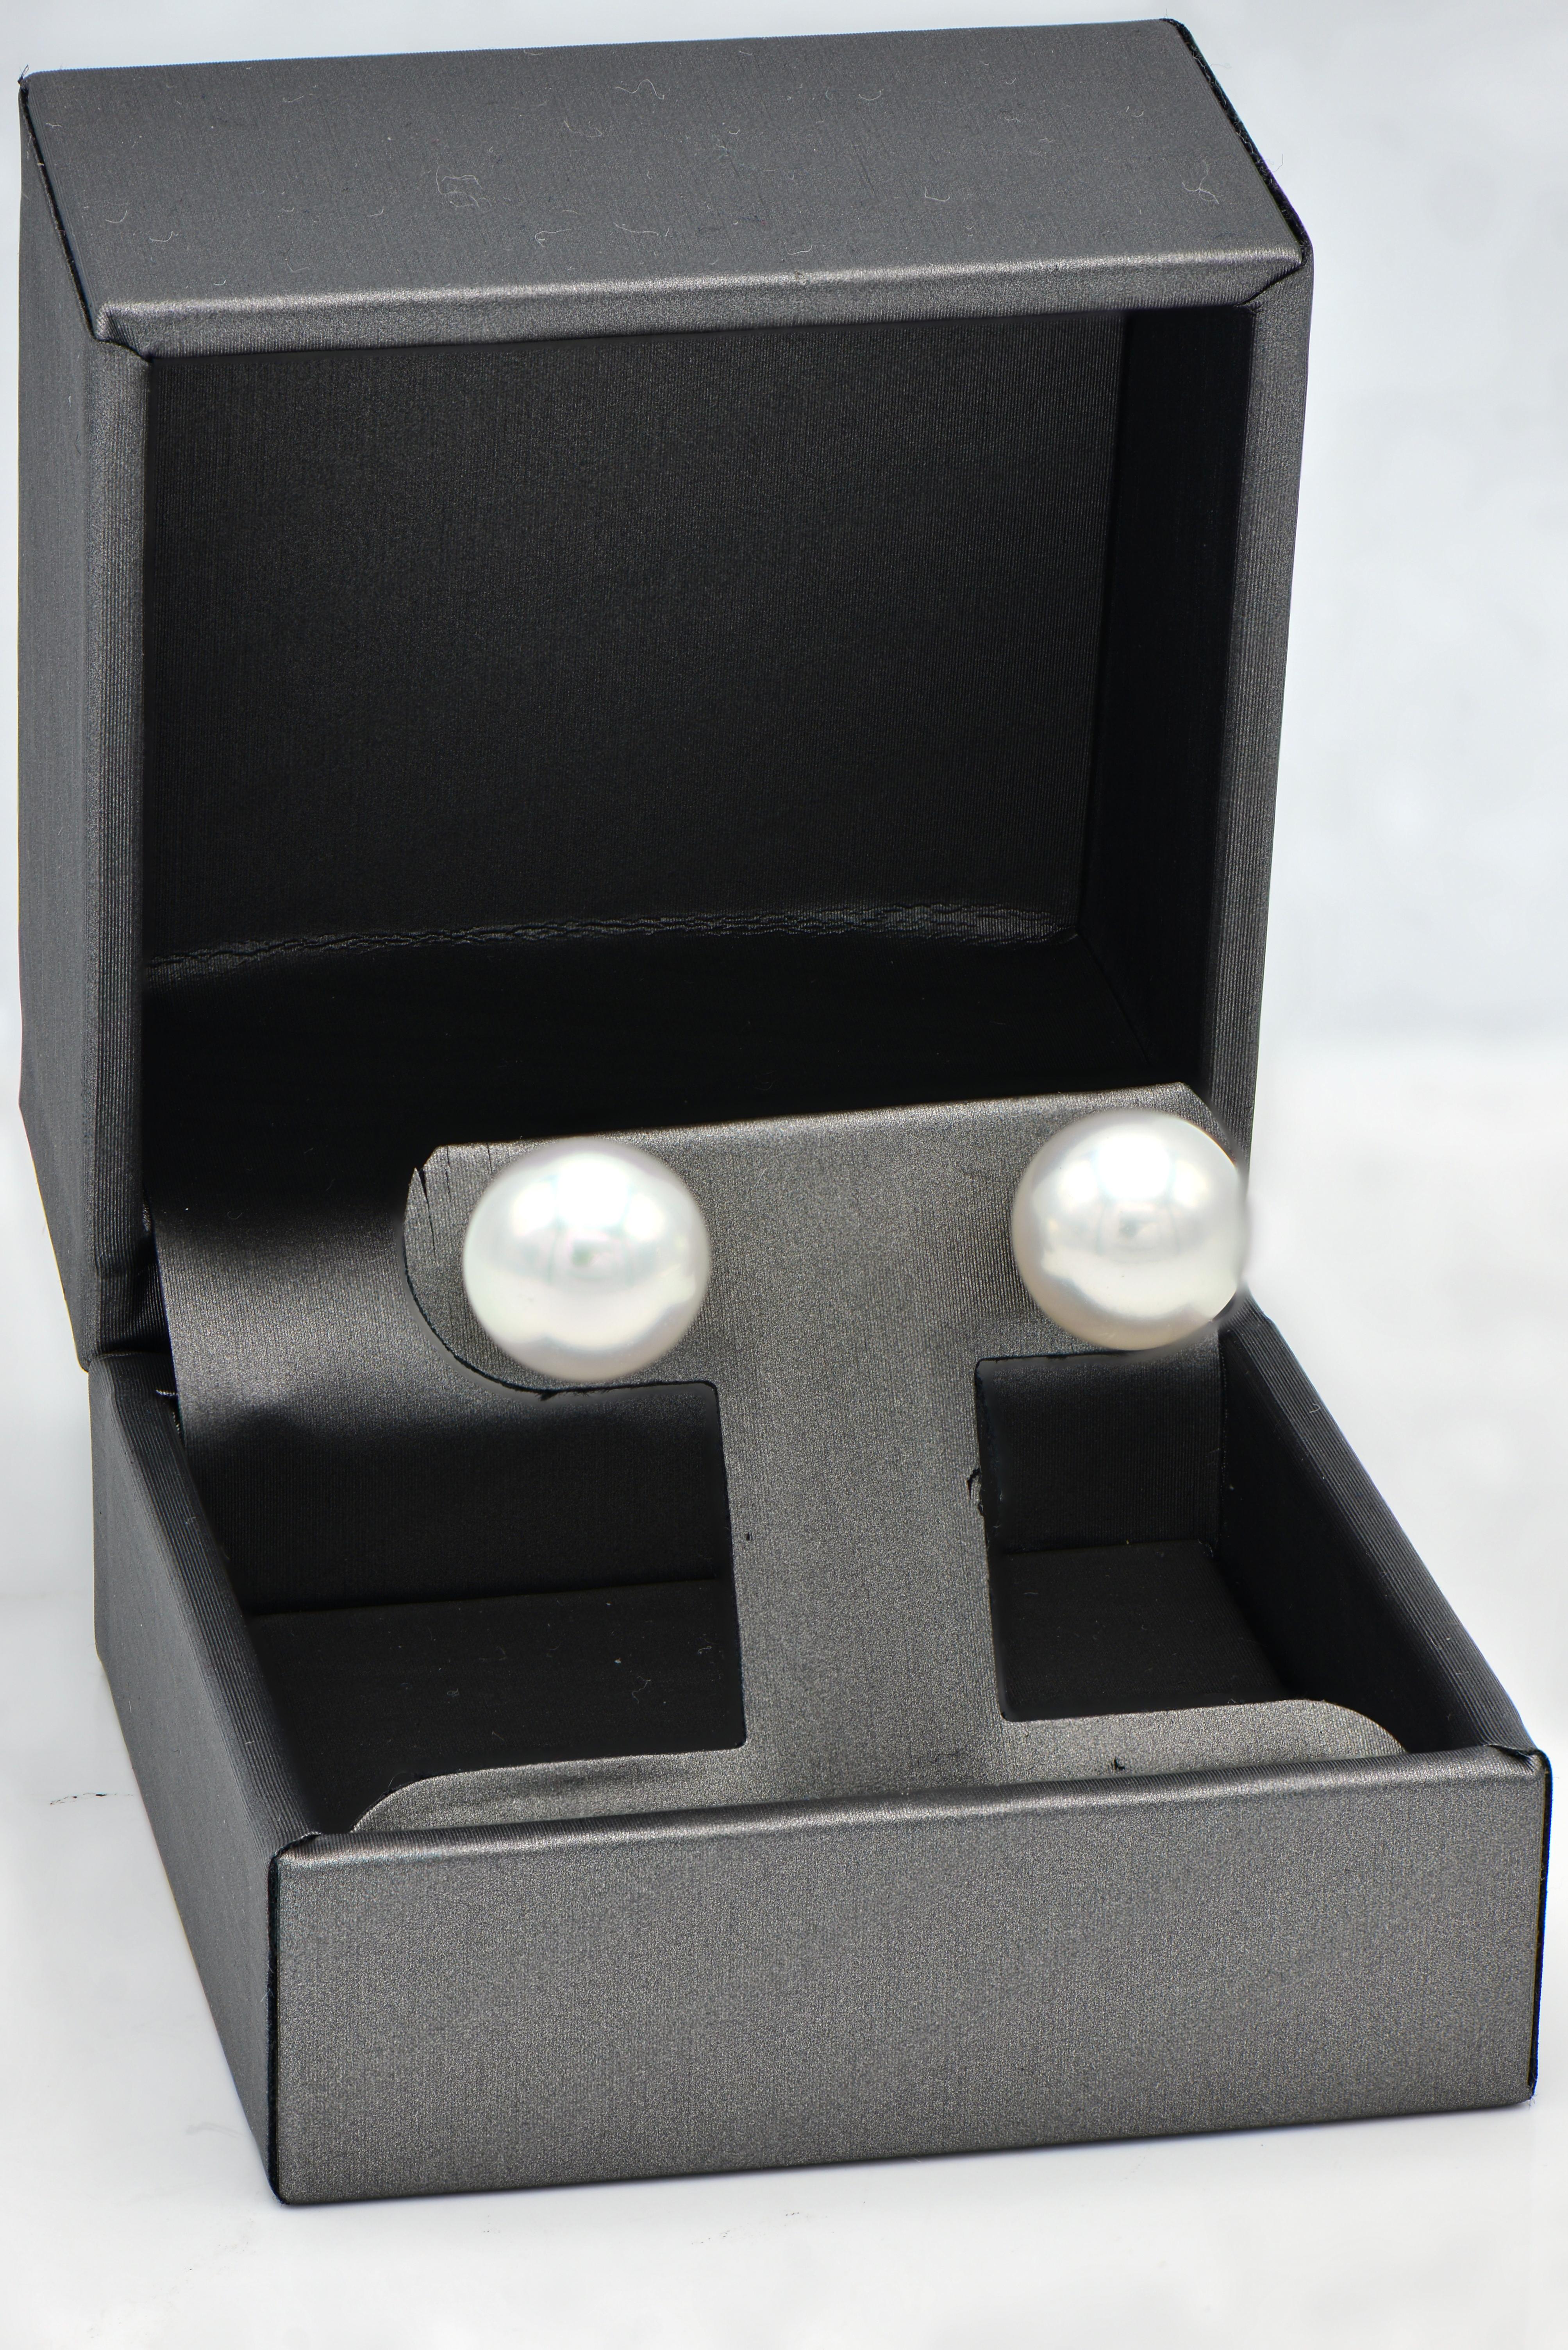 South Sea Pearl Stud Earrings are a classic and timeless piece of jewelry that should be owned by everyone. South Sea studs are slightly larger than cultured pearl studs for a bigger more sophisticated look. These 11.5-12mm South Sea Pearl Studs are